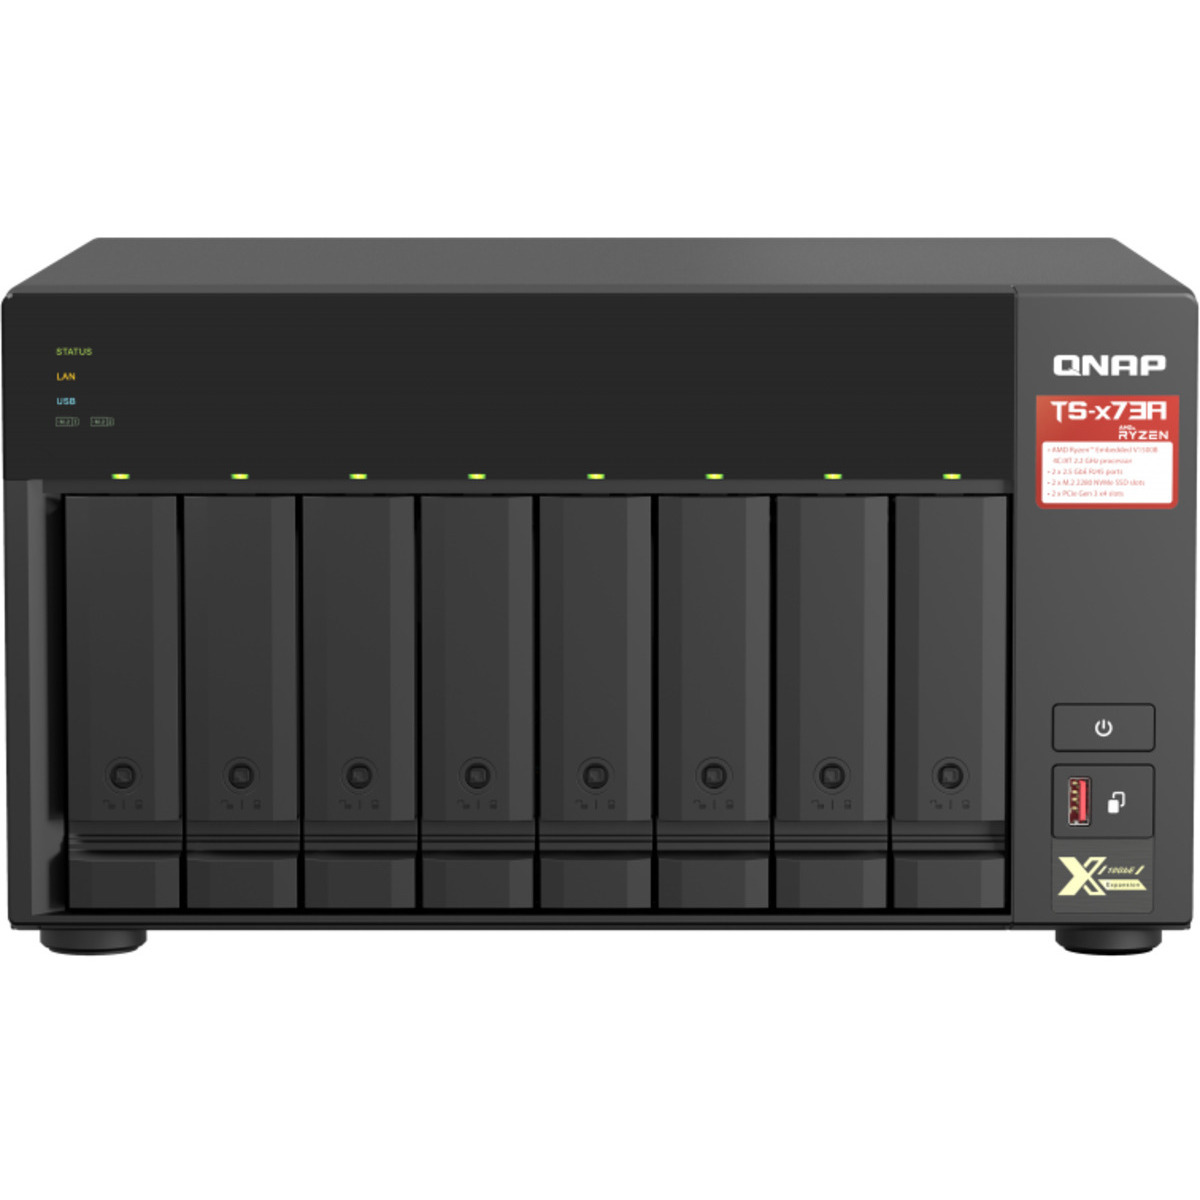 QNAP TS-873A 128tb 8-Bay Desktop Multimedia / Power User / Business NAS - Network Attached Storage Device 8x16tb Western Digital Red Pro WD161KFGX 3.5 7200rpm SATA 6Gb/s HDD NAS Class Drives Installed - Burn-In Tested TS-873A